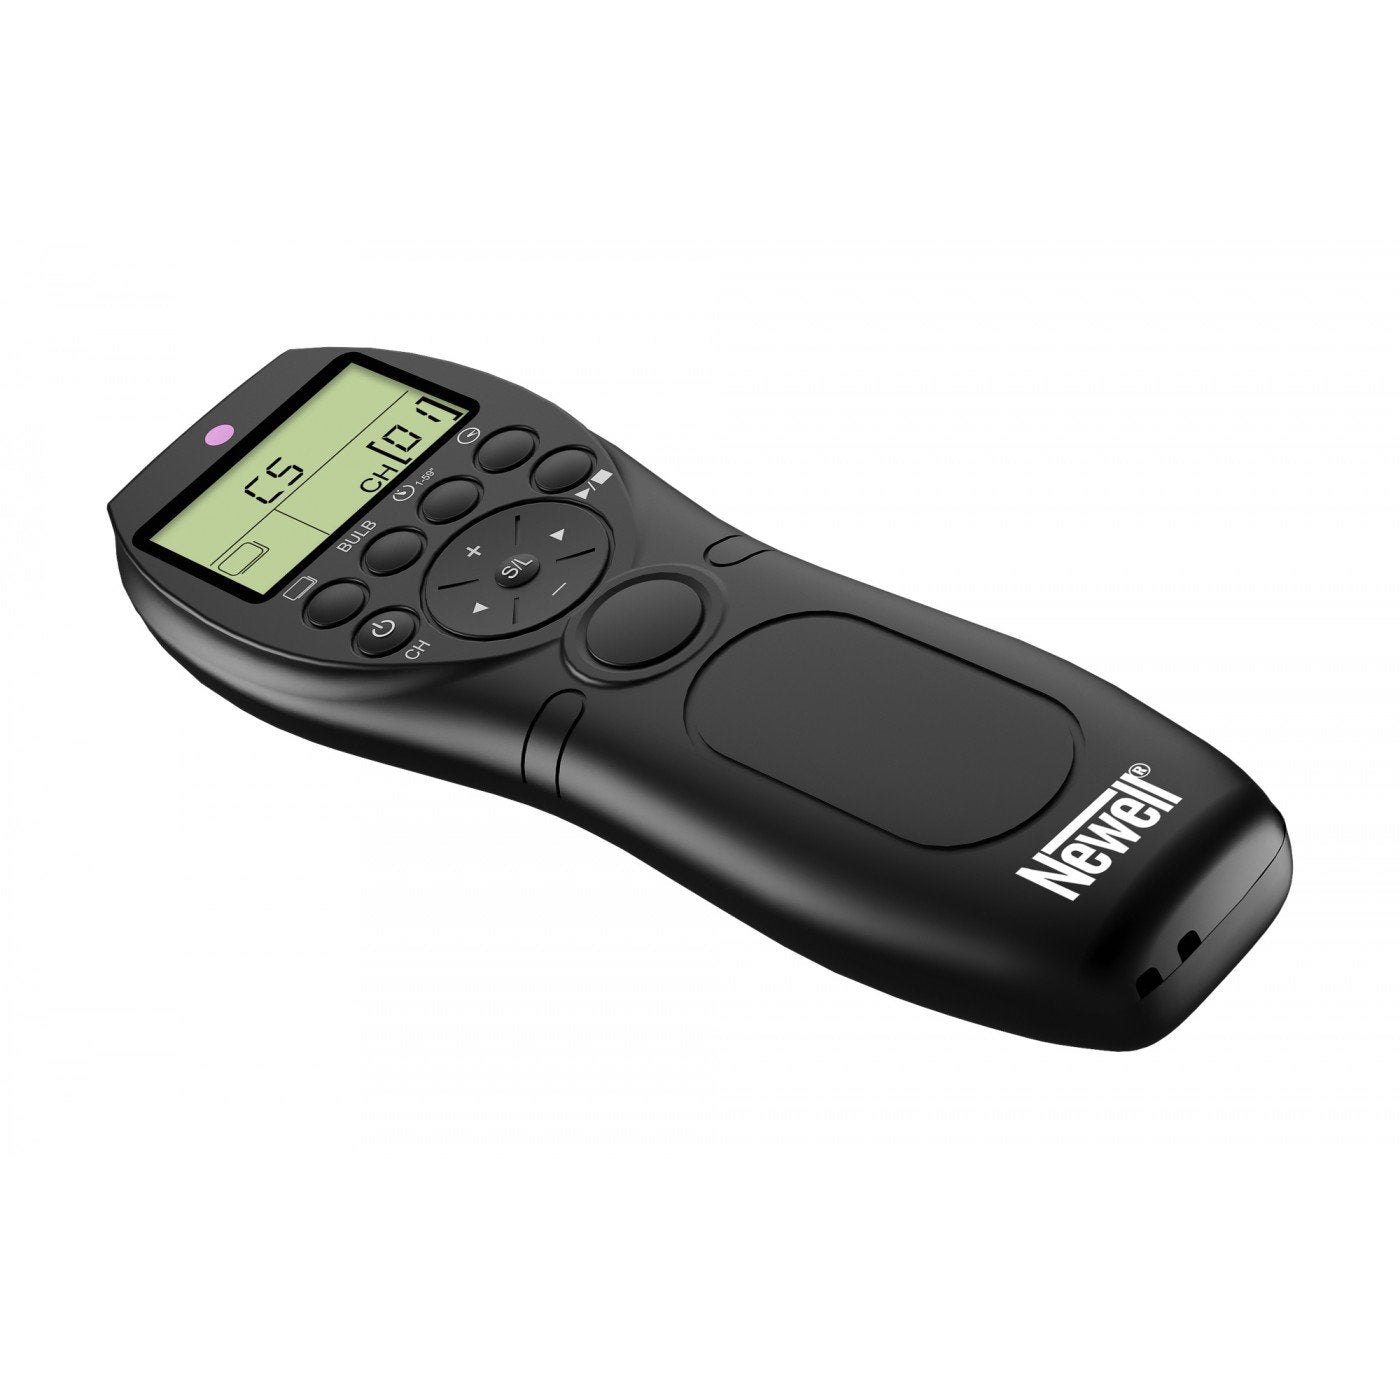 Newell Wireless remote control with intervalometer for Canon